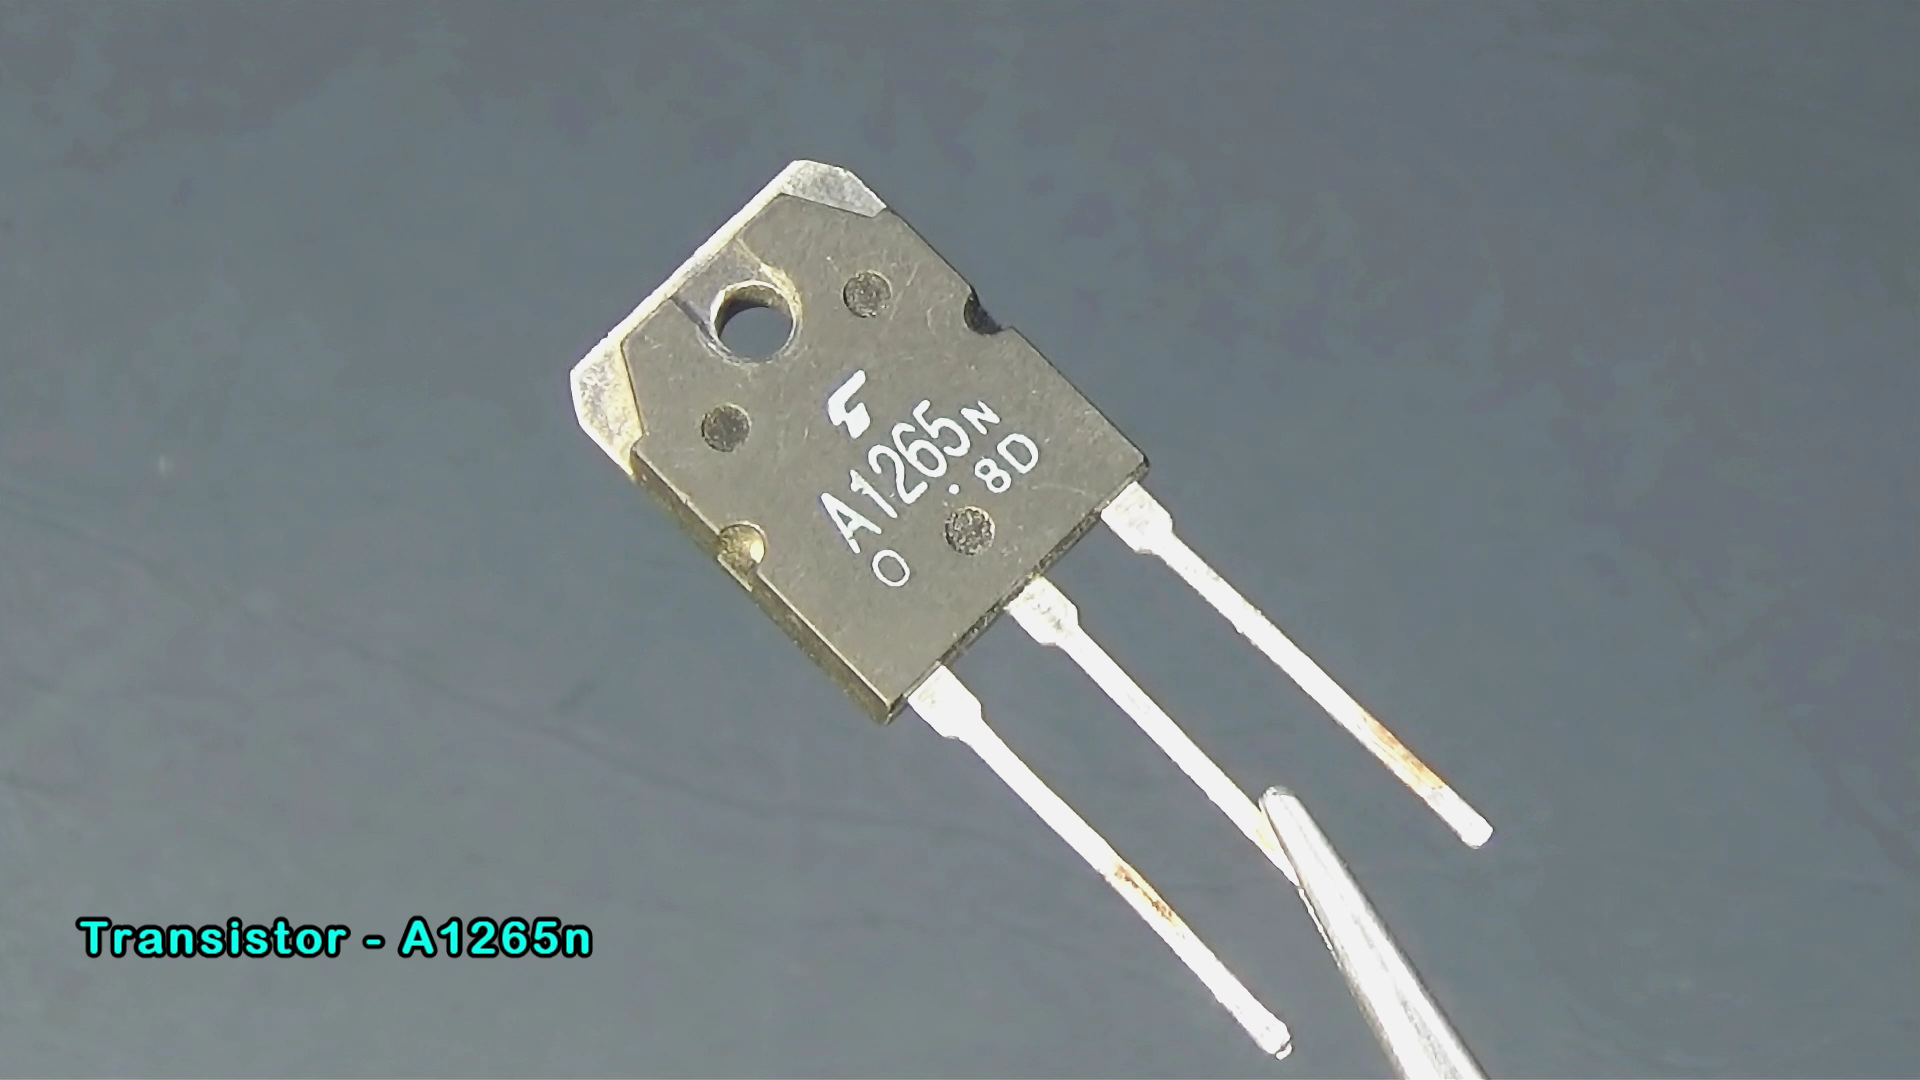 Top 2 Mini Amplifier Circuit In 2021 - DC 12v.mp4_000144760.png